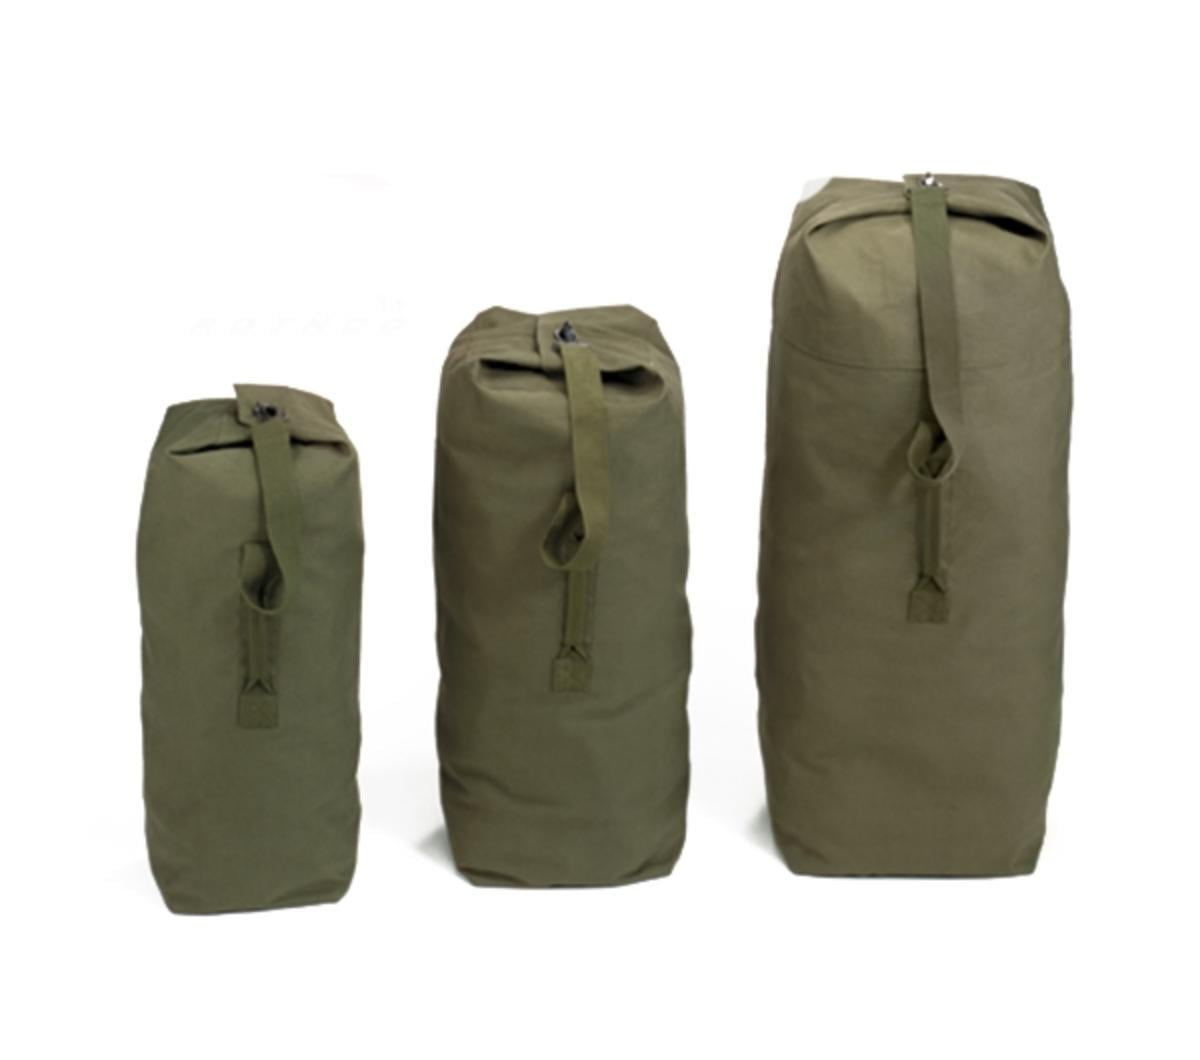 Rothco Top Load Canvas Duffle Bags, Military Style Gear Bags - 0